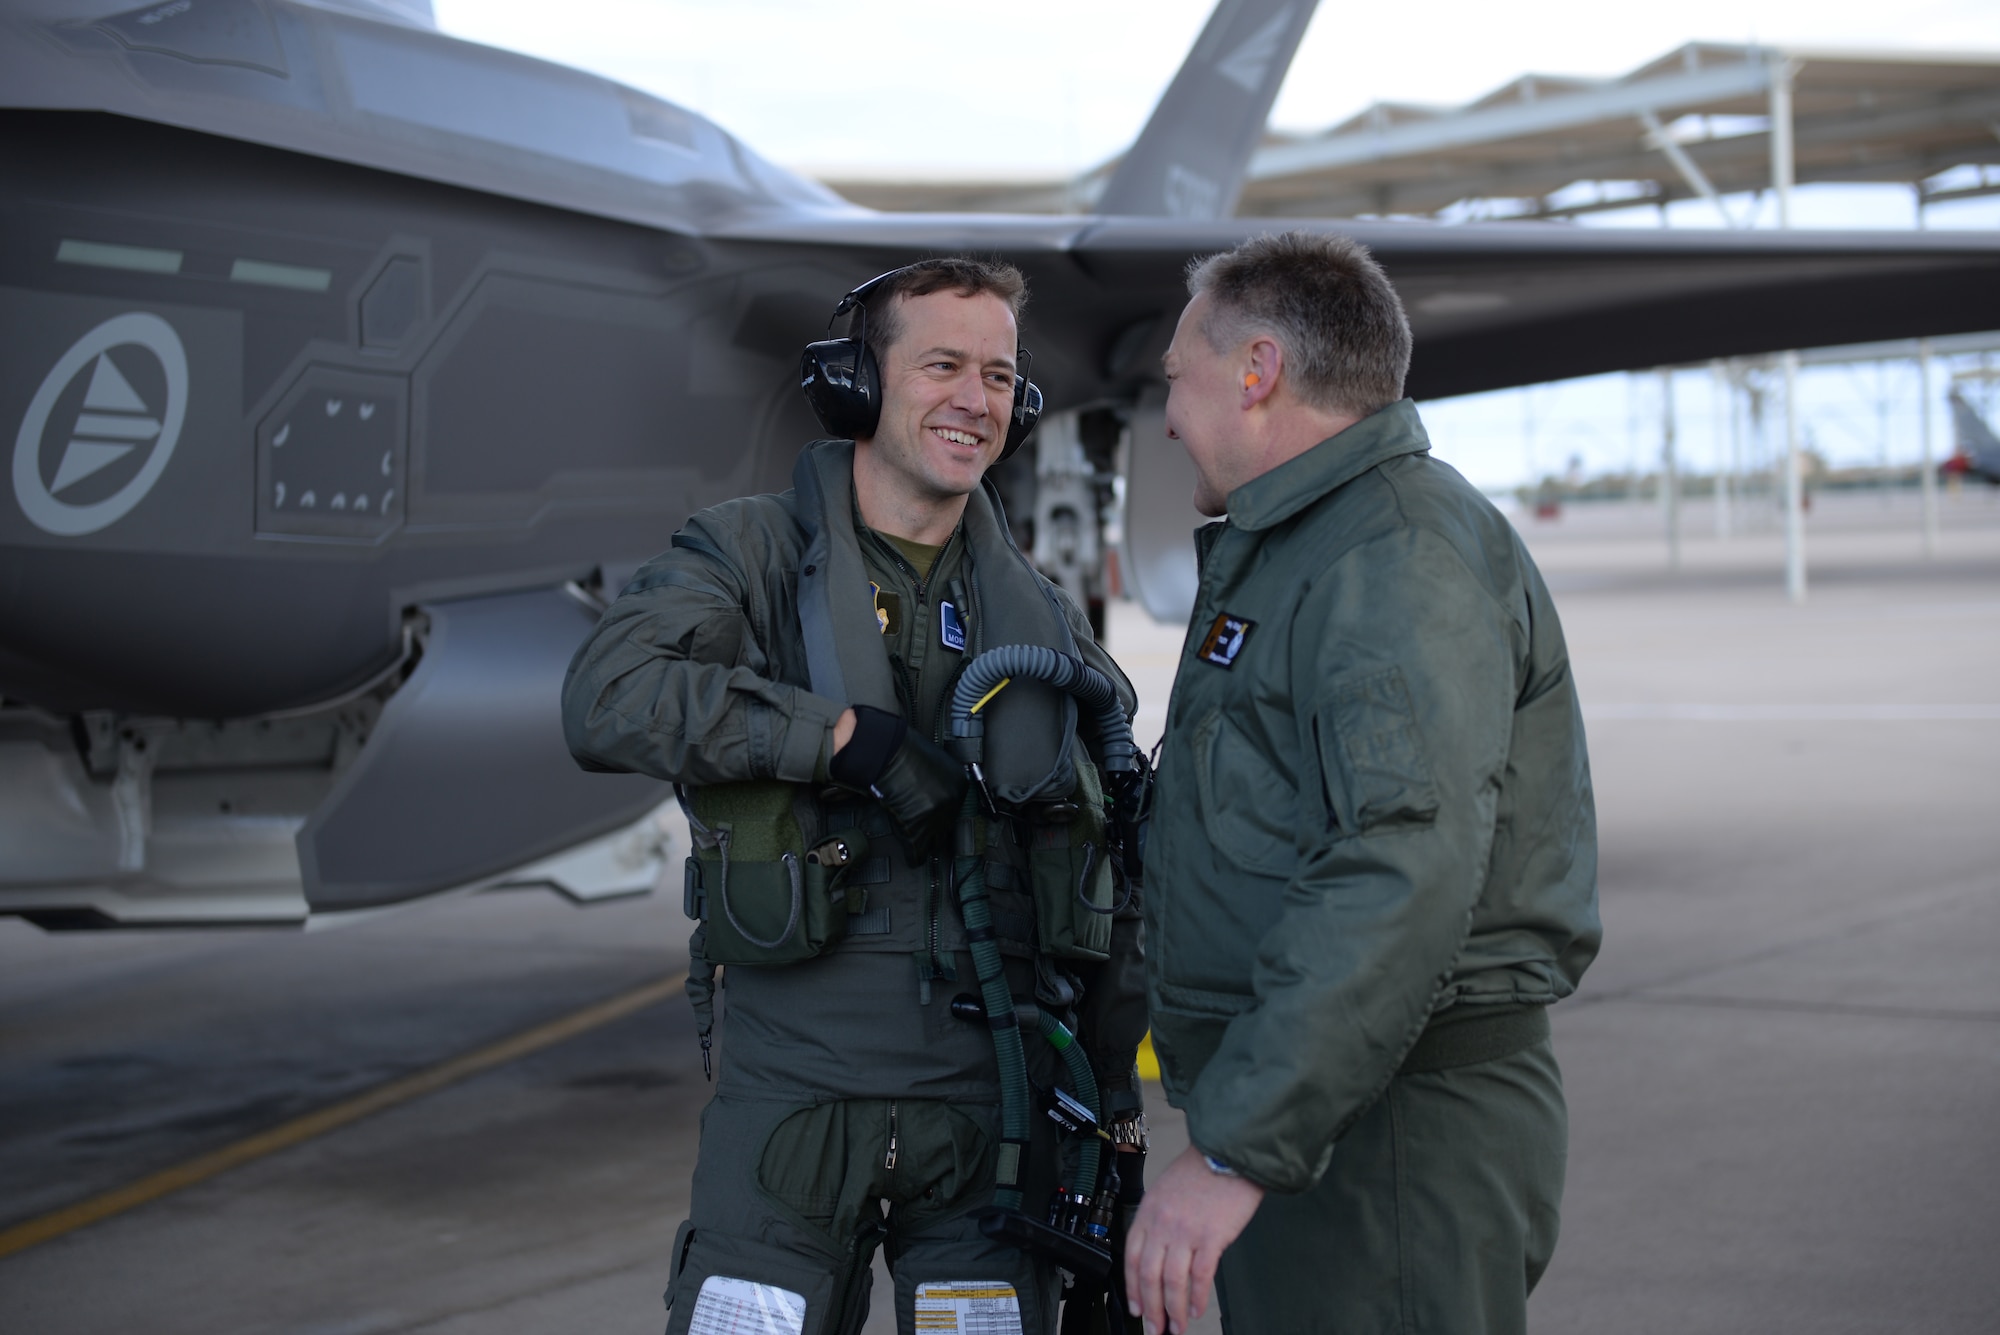 Norwegian Maj. Morten Hanche, 62nd Fighter Squadron student pilot, is congratulated by Maj. Gen. Per-Egil Rygg, Royal Norwegian air force chief of staff, after successfully completing a sortie in a Norwegian F-35, the first ever by a Norwegian pilot, Dec. 14, 2015, at Luke Air Force Base. (U.S. Air Force photo by Airman 1st Class Ridge Shan)